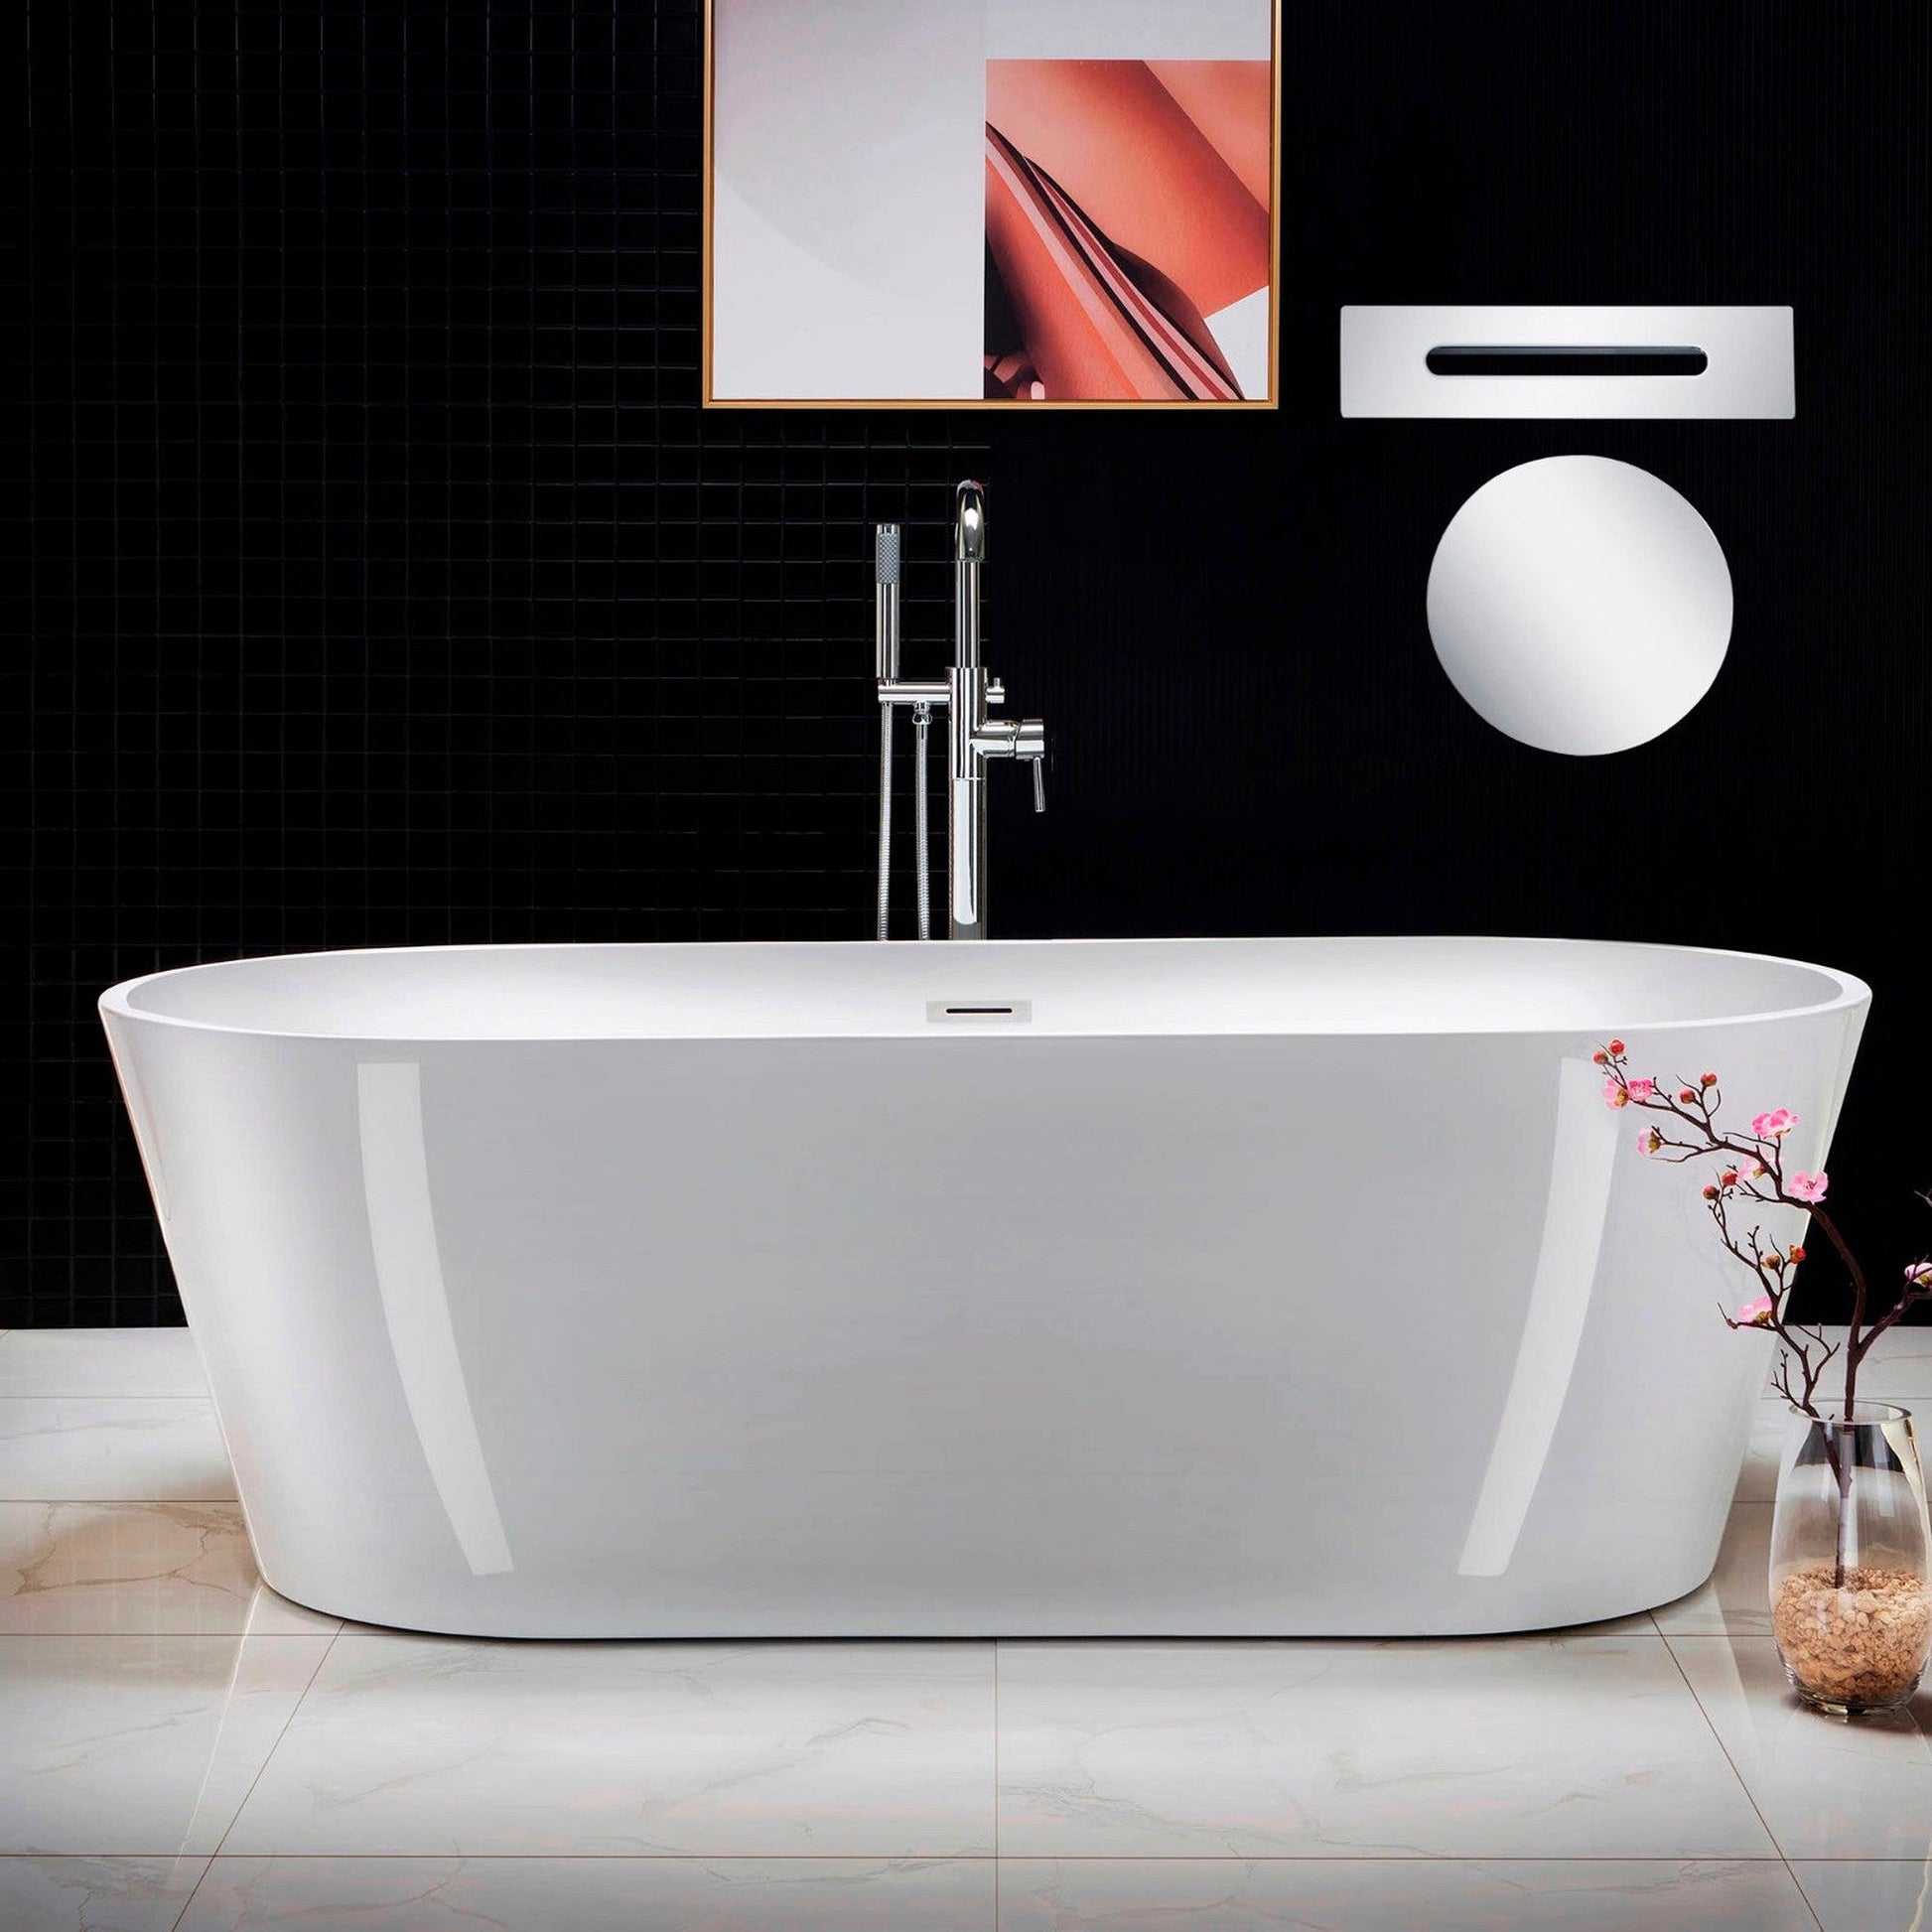 WoodBridge 71" White Acrylic Freestanding Contemporary Soaking Bathtub With Chrome Drain, Overflow, F0024CHRD Tub Filler and Caddy Tray